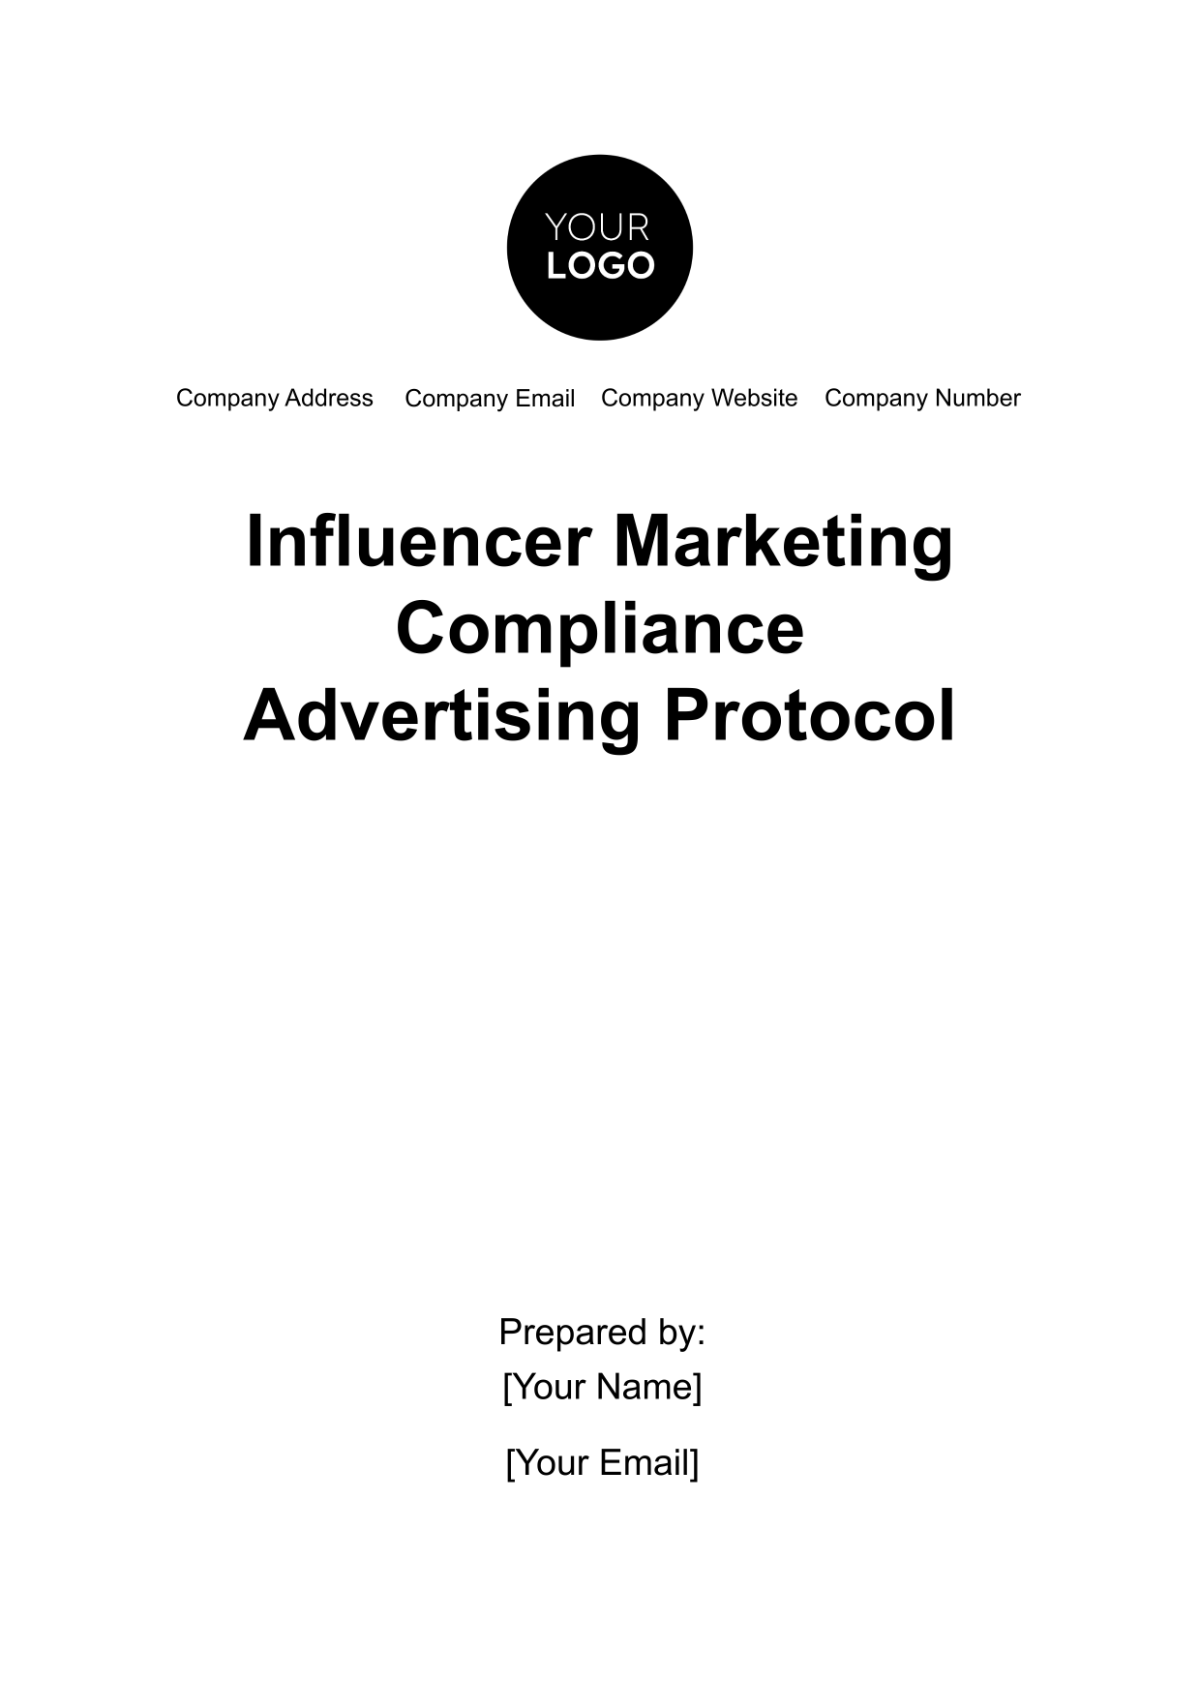 Influencer Marketing Compliance Advertising Protocol Template